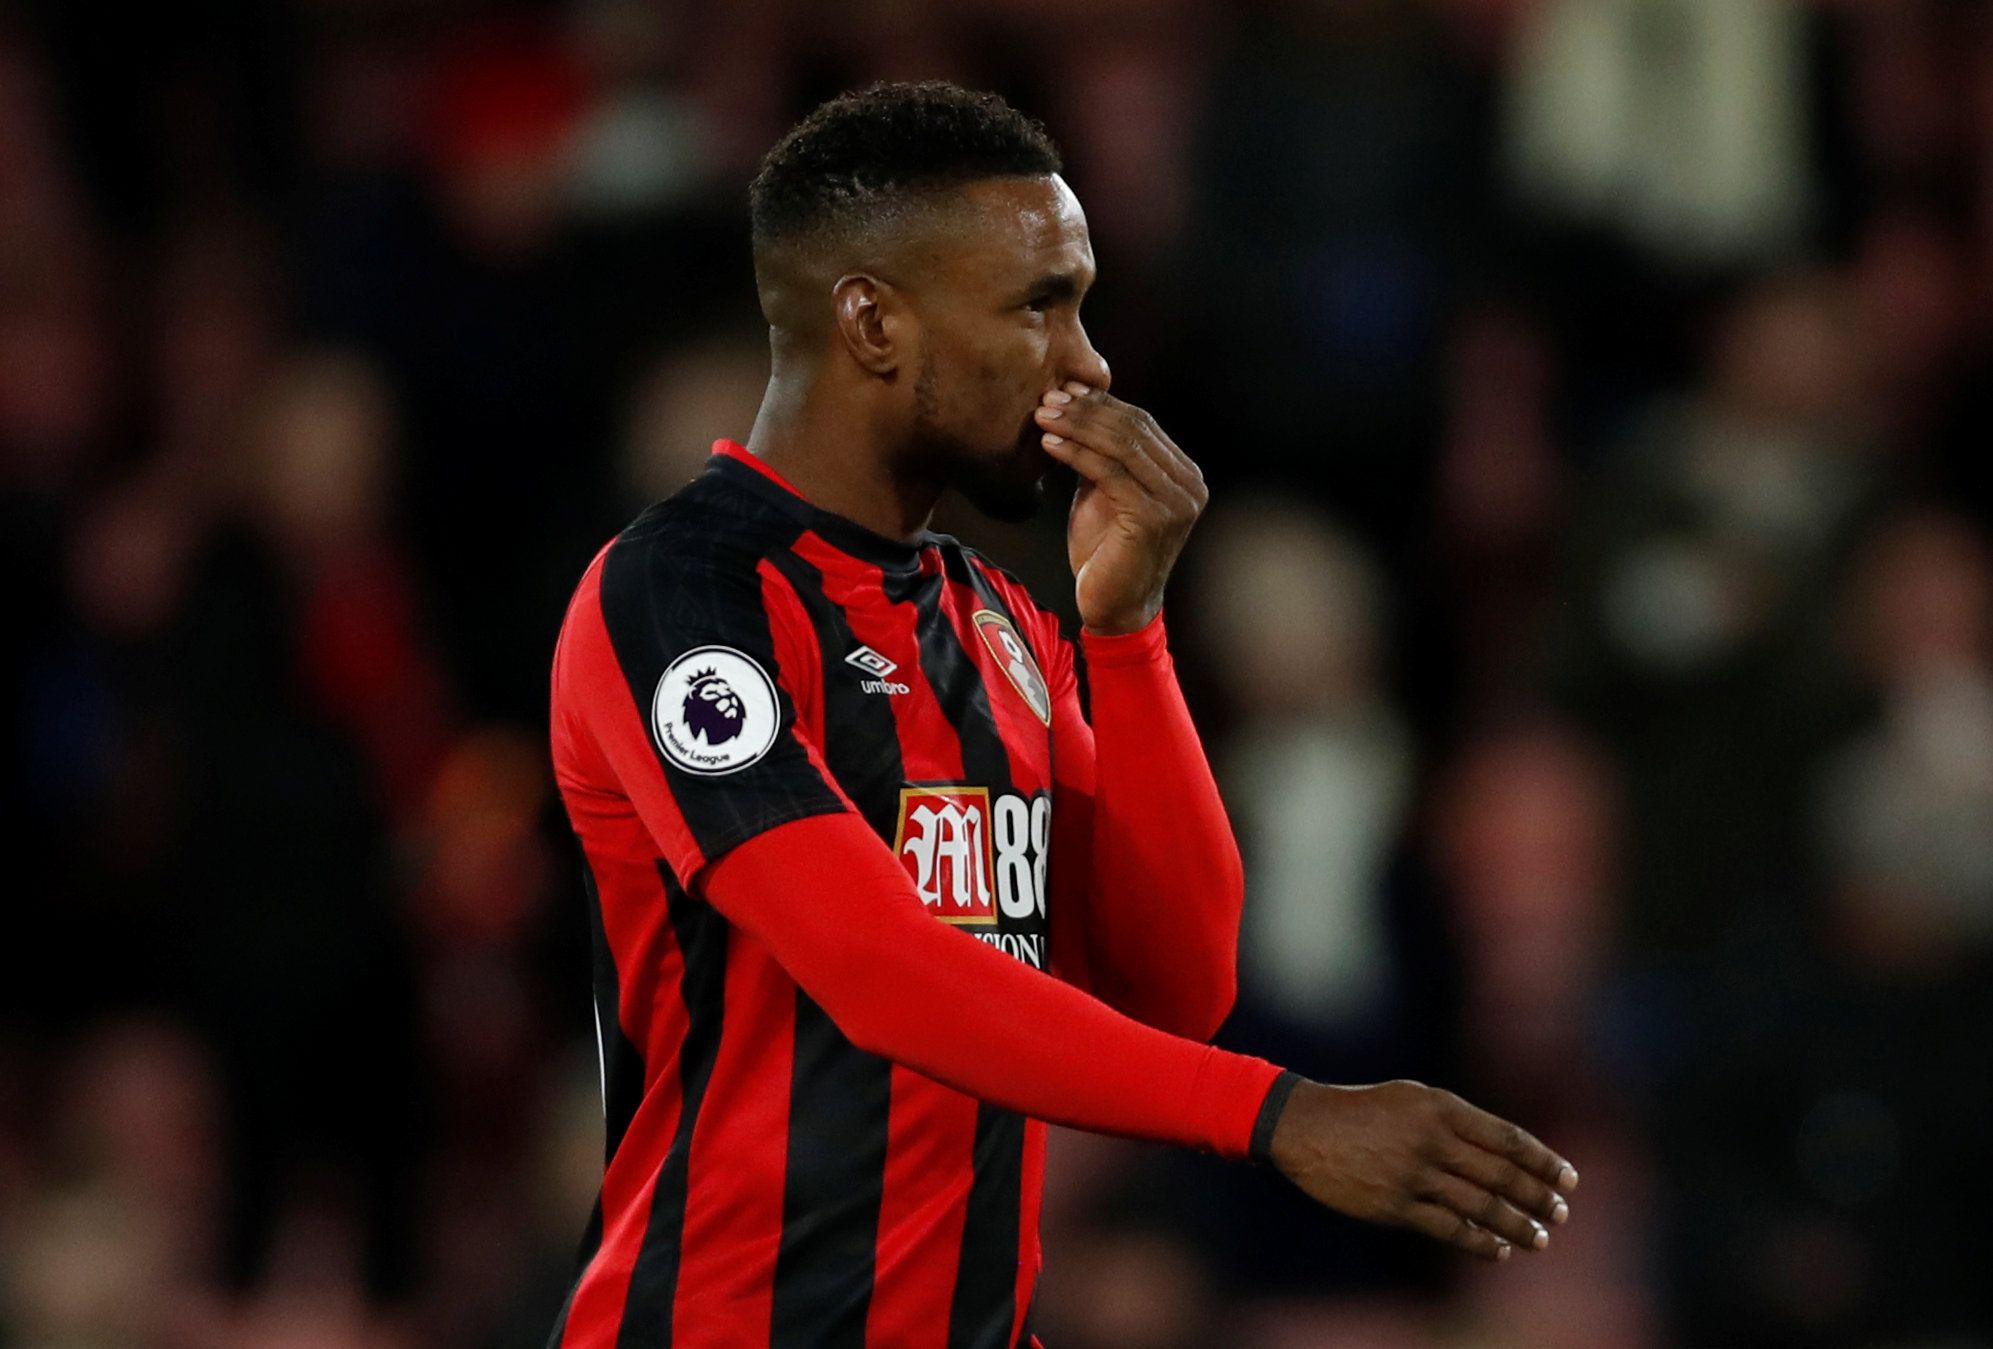 Soccer Football - Premier League - AFC Bournemouth vs Liverpool - Vitality Stadium, Bournemouth, Britain - December 17, 2017   Bournemouth's Jermain Defoe looks dejected after the match    Action Images via Reuters/Paul Childs    EDITORIAL USE ONLY. No use with unauthorized audio, video, data, fixture lists, club/league logos or "live" services. Online in-match use limited to 75 images, no video emulation. No use in betting, games or single club/league/player publications.  Please contact your a